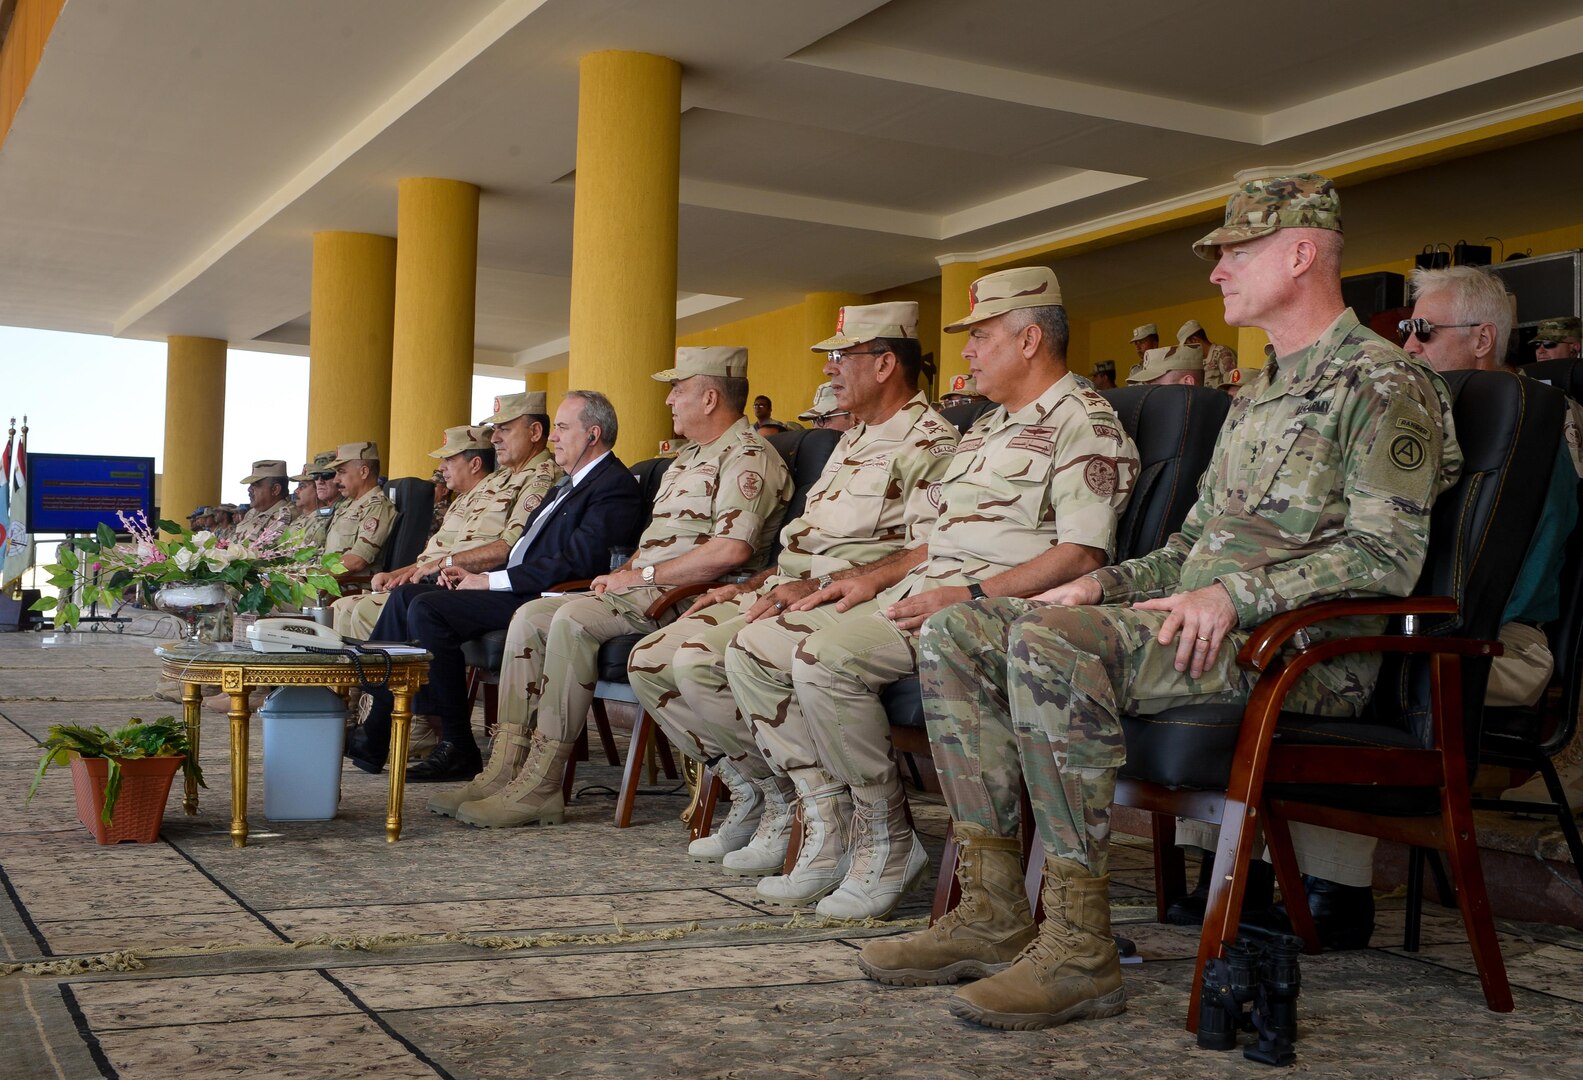 U.S. Army Maj. Gen. Terrence McKenrick, U.S. Army Central deputy commanding general, and Egyptian senior leaders watch a combined arms live fire exercise demonstration during Bright Star 2017, Sept. 20, 2017, at Mohamed Naguib Military Base, Egypt. Bright Star 2017 centralizes around regional security and cooperation, and promoting interoperability in conventional and irregular warfare scenarios. (U.S. Air Force photo by Staff Sgt. Michael Battles)